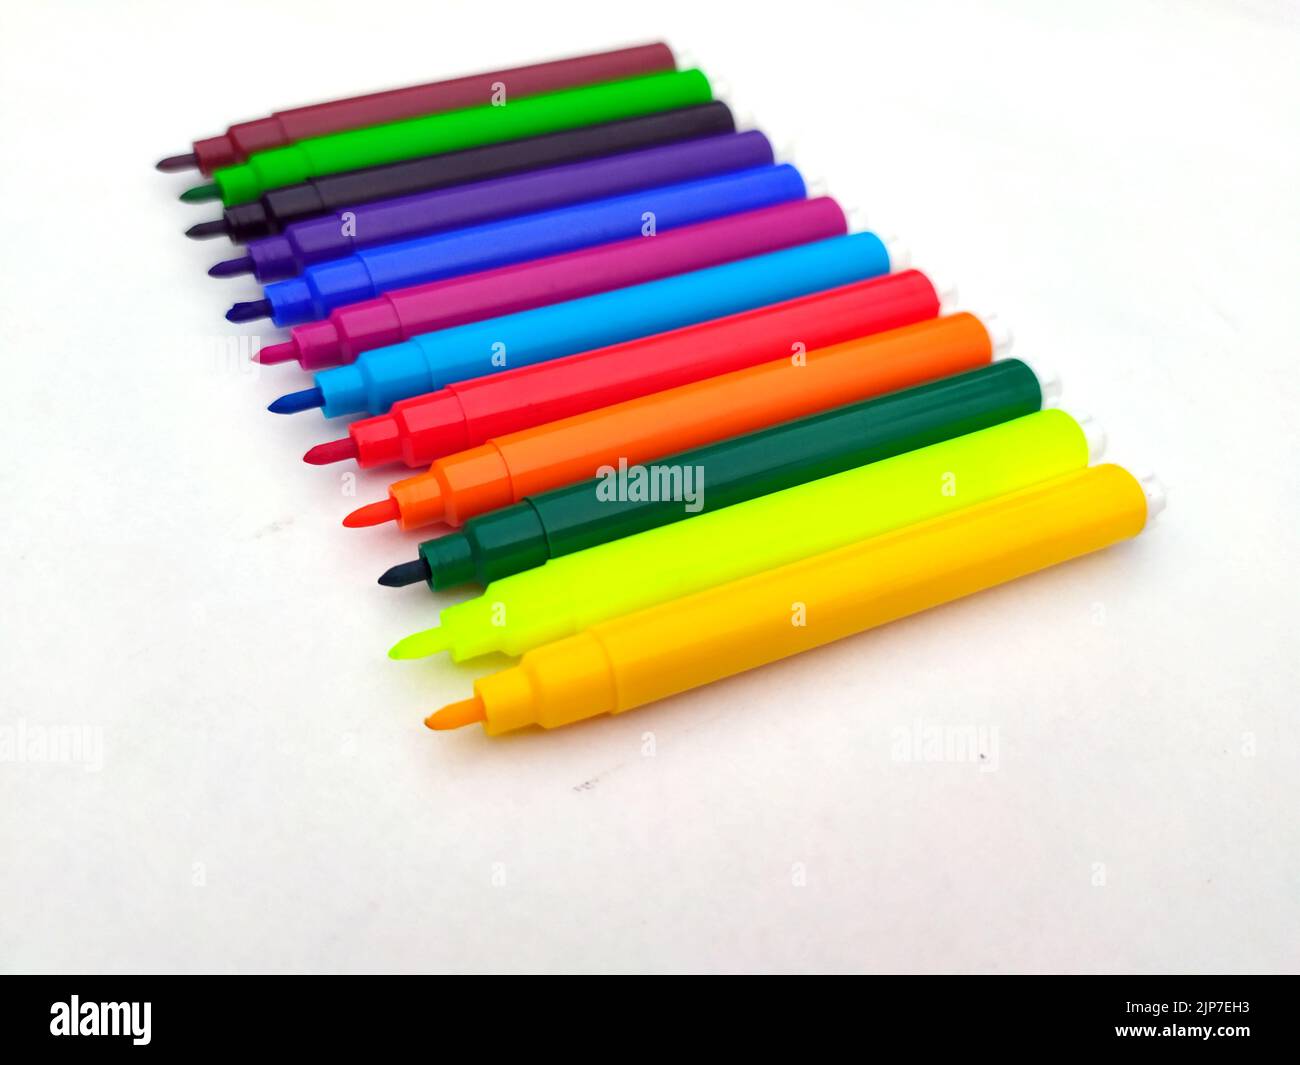 https://c8.alamy.com/comp/2JP7EH3/colorful-marker-isolated-on-white-background-2JP7EH3.jpg